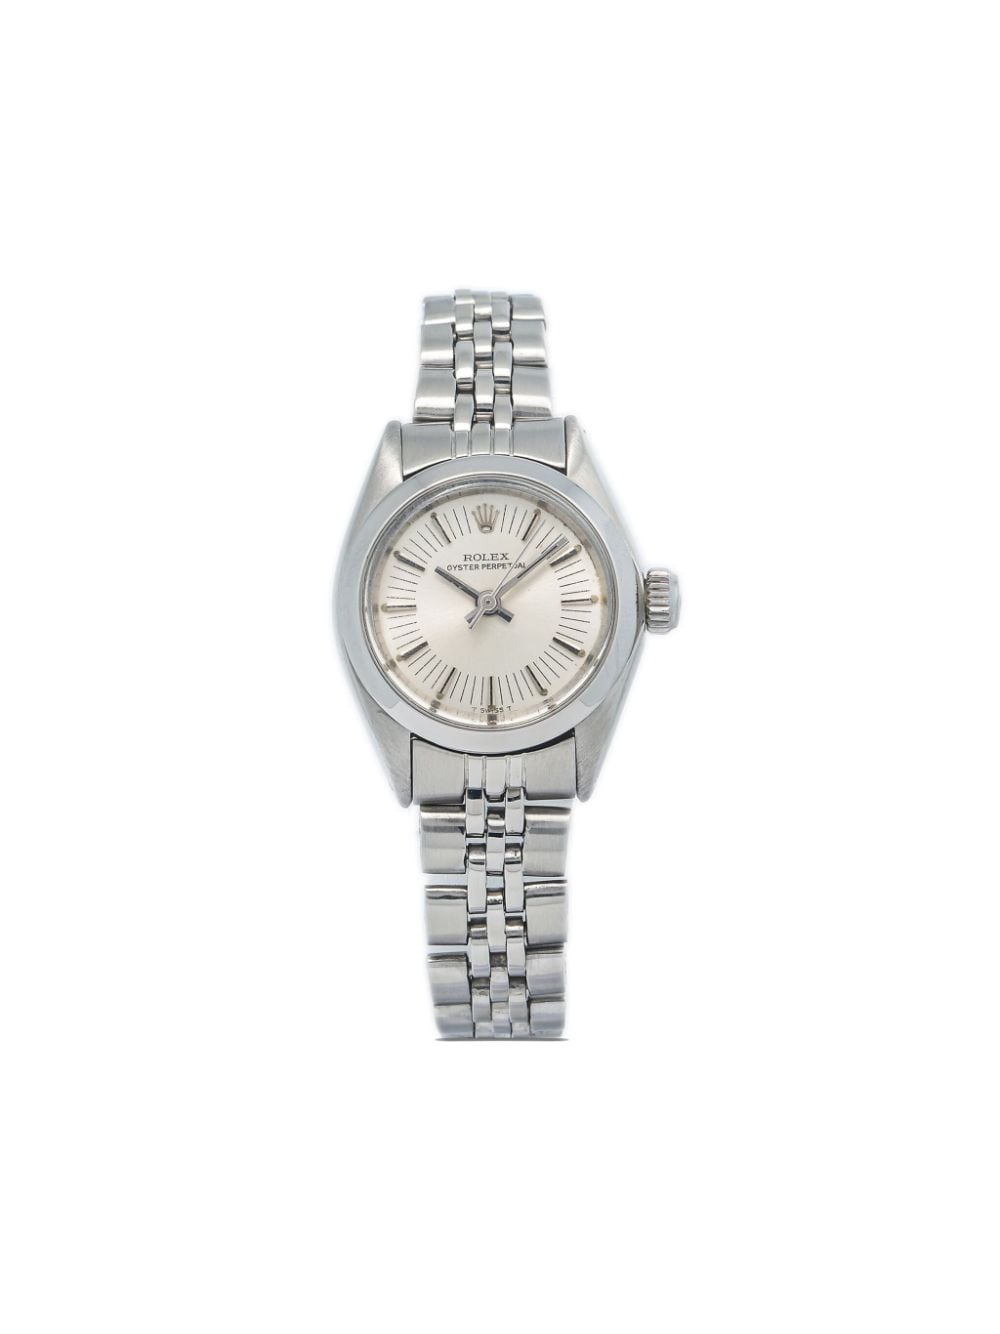 Rolex pre-owned Oyster Perpetual 24mm - Silver von Rolex